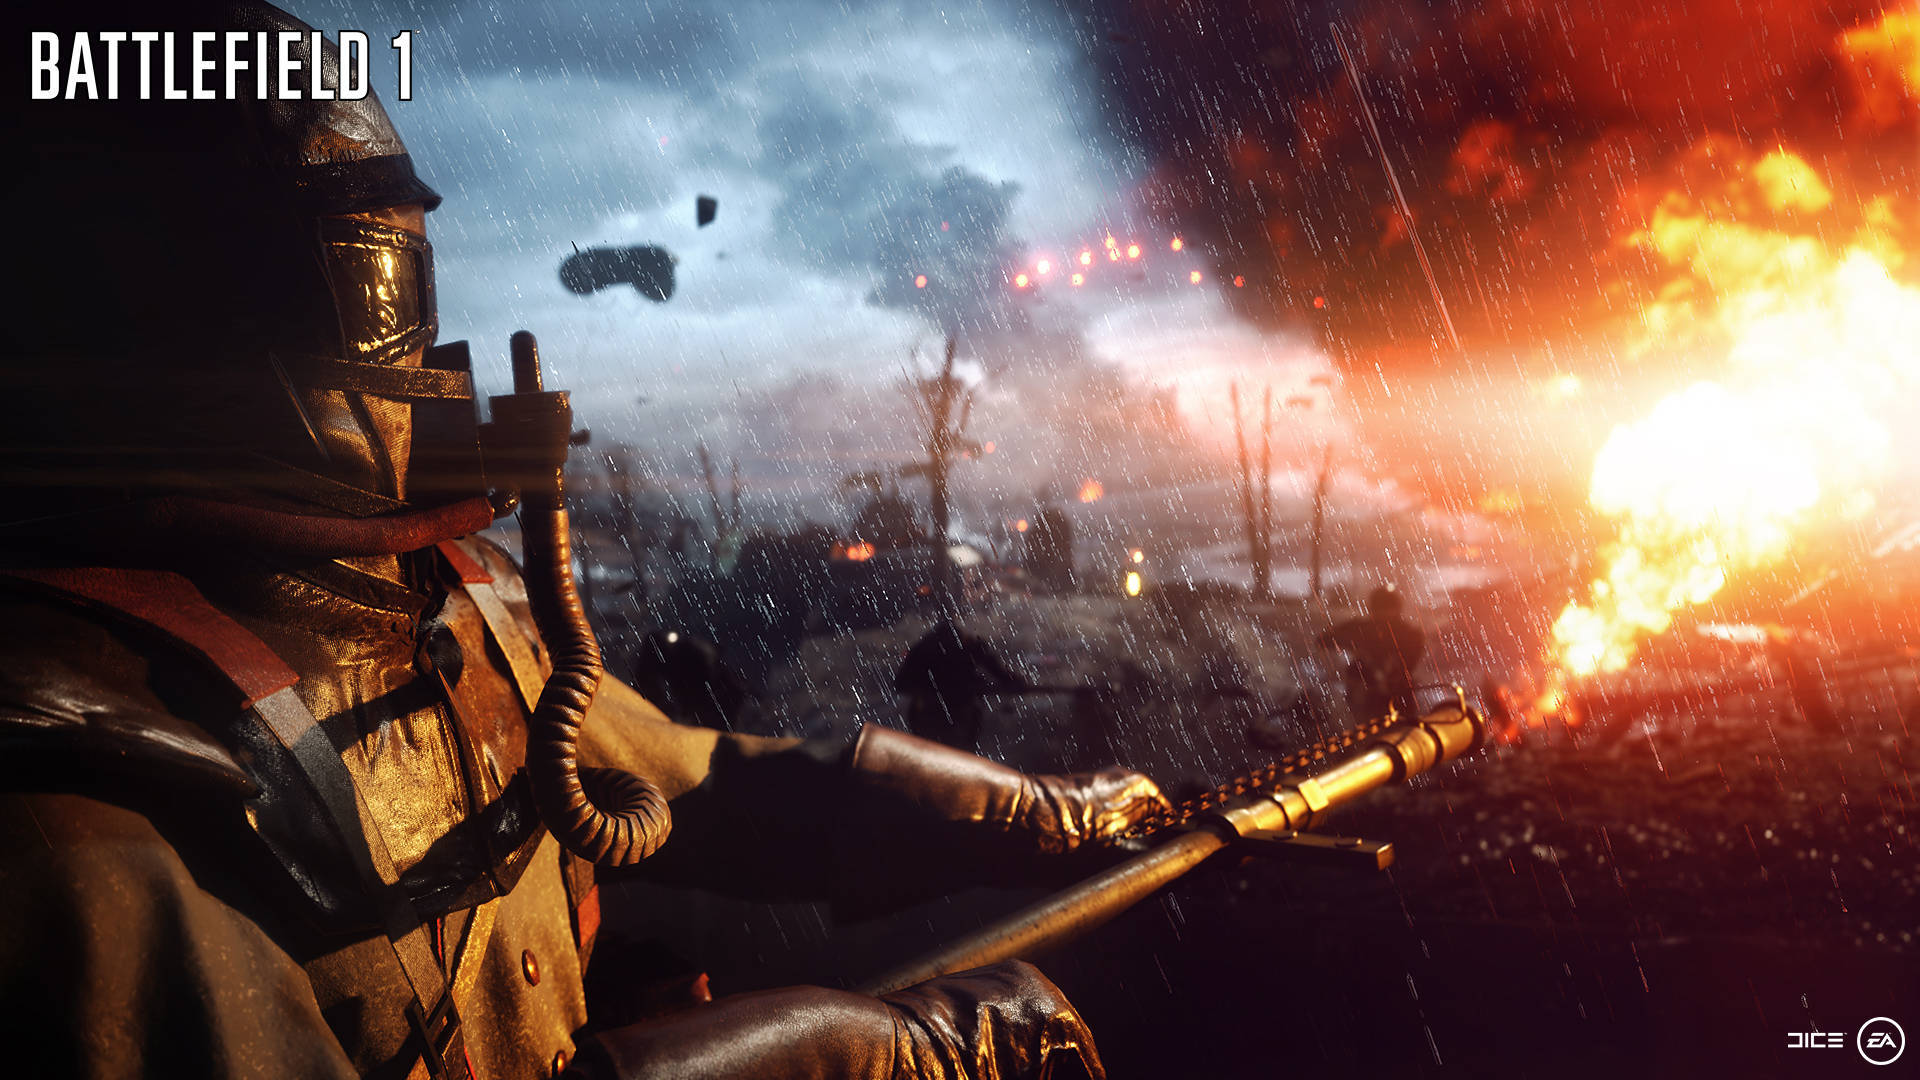 Explosive Action: The Flame Trooper From Battlefield 1 In Hd Background